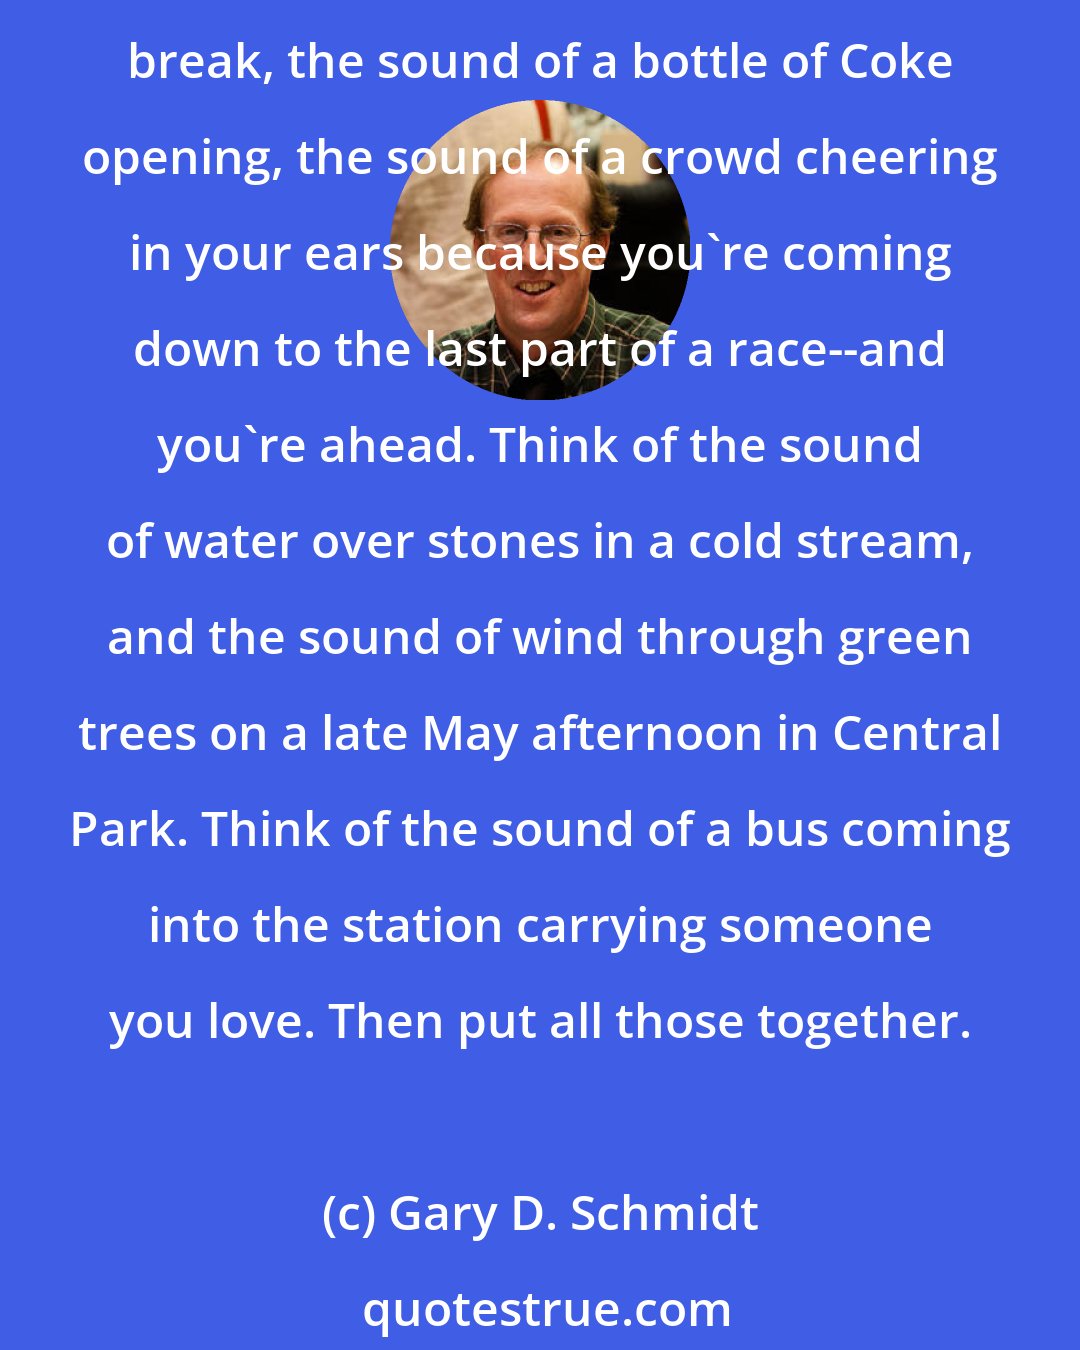 Gary D. Schmidt: Think of the sound you make when you let go after holding your breath for a very, very long time. Think of the gladdest sound you know: the sound of dawn on the first day of spring break, the sound of a bottle of Coke opening, the sound of a crowd cheering in your ears because you're coming down to the last part of a race--and you're ahead. Think of the sound of water over stones in a cold stream, and the sound of wind through green trees on a late May afternoon in Central Park. Think of the sound of a bus coming into the station carrying someone you love. Then put all those together.